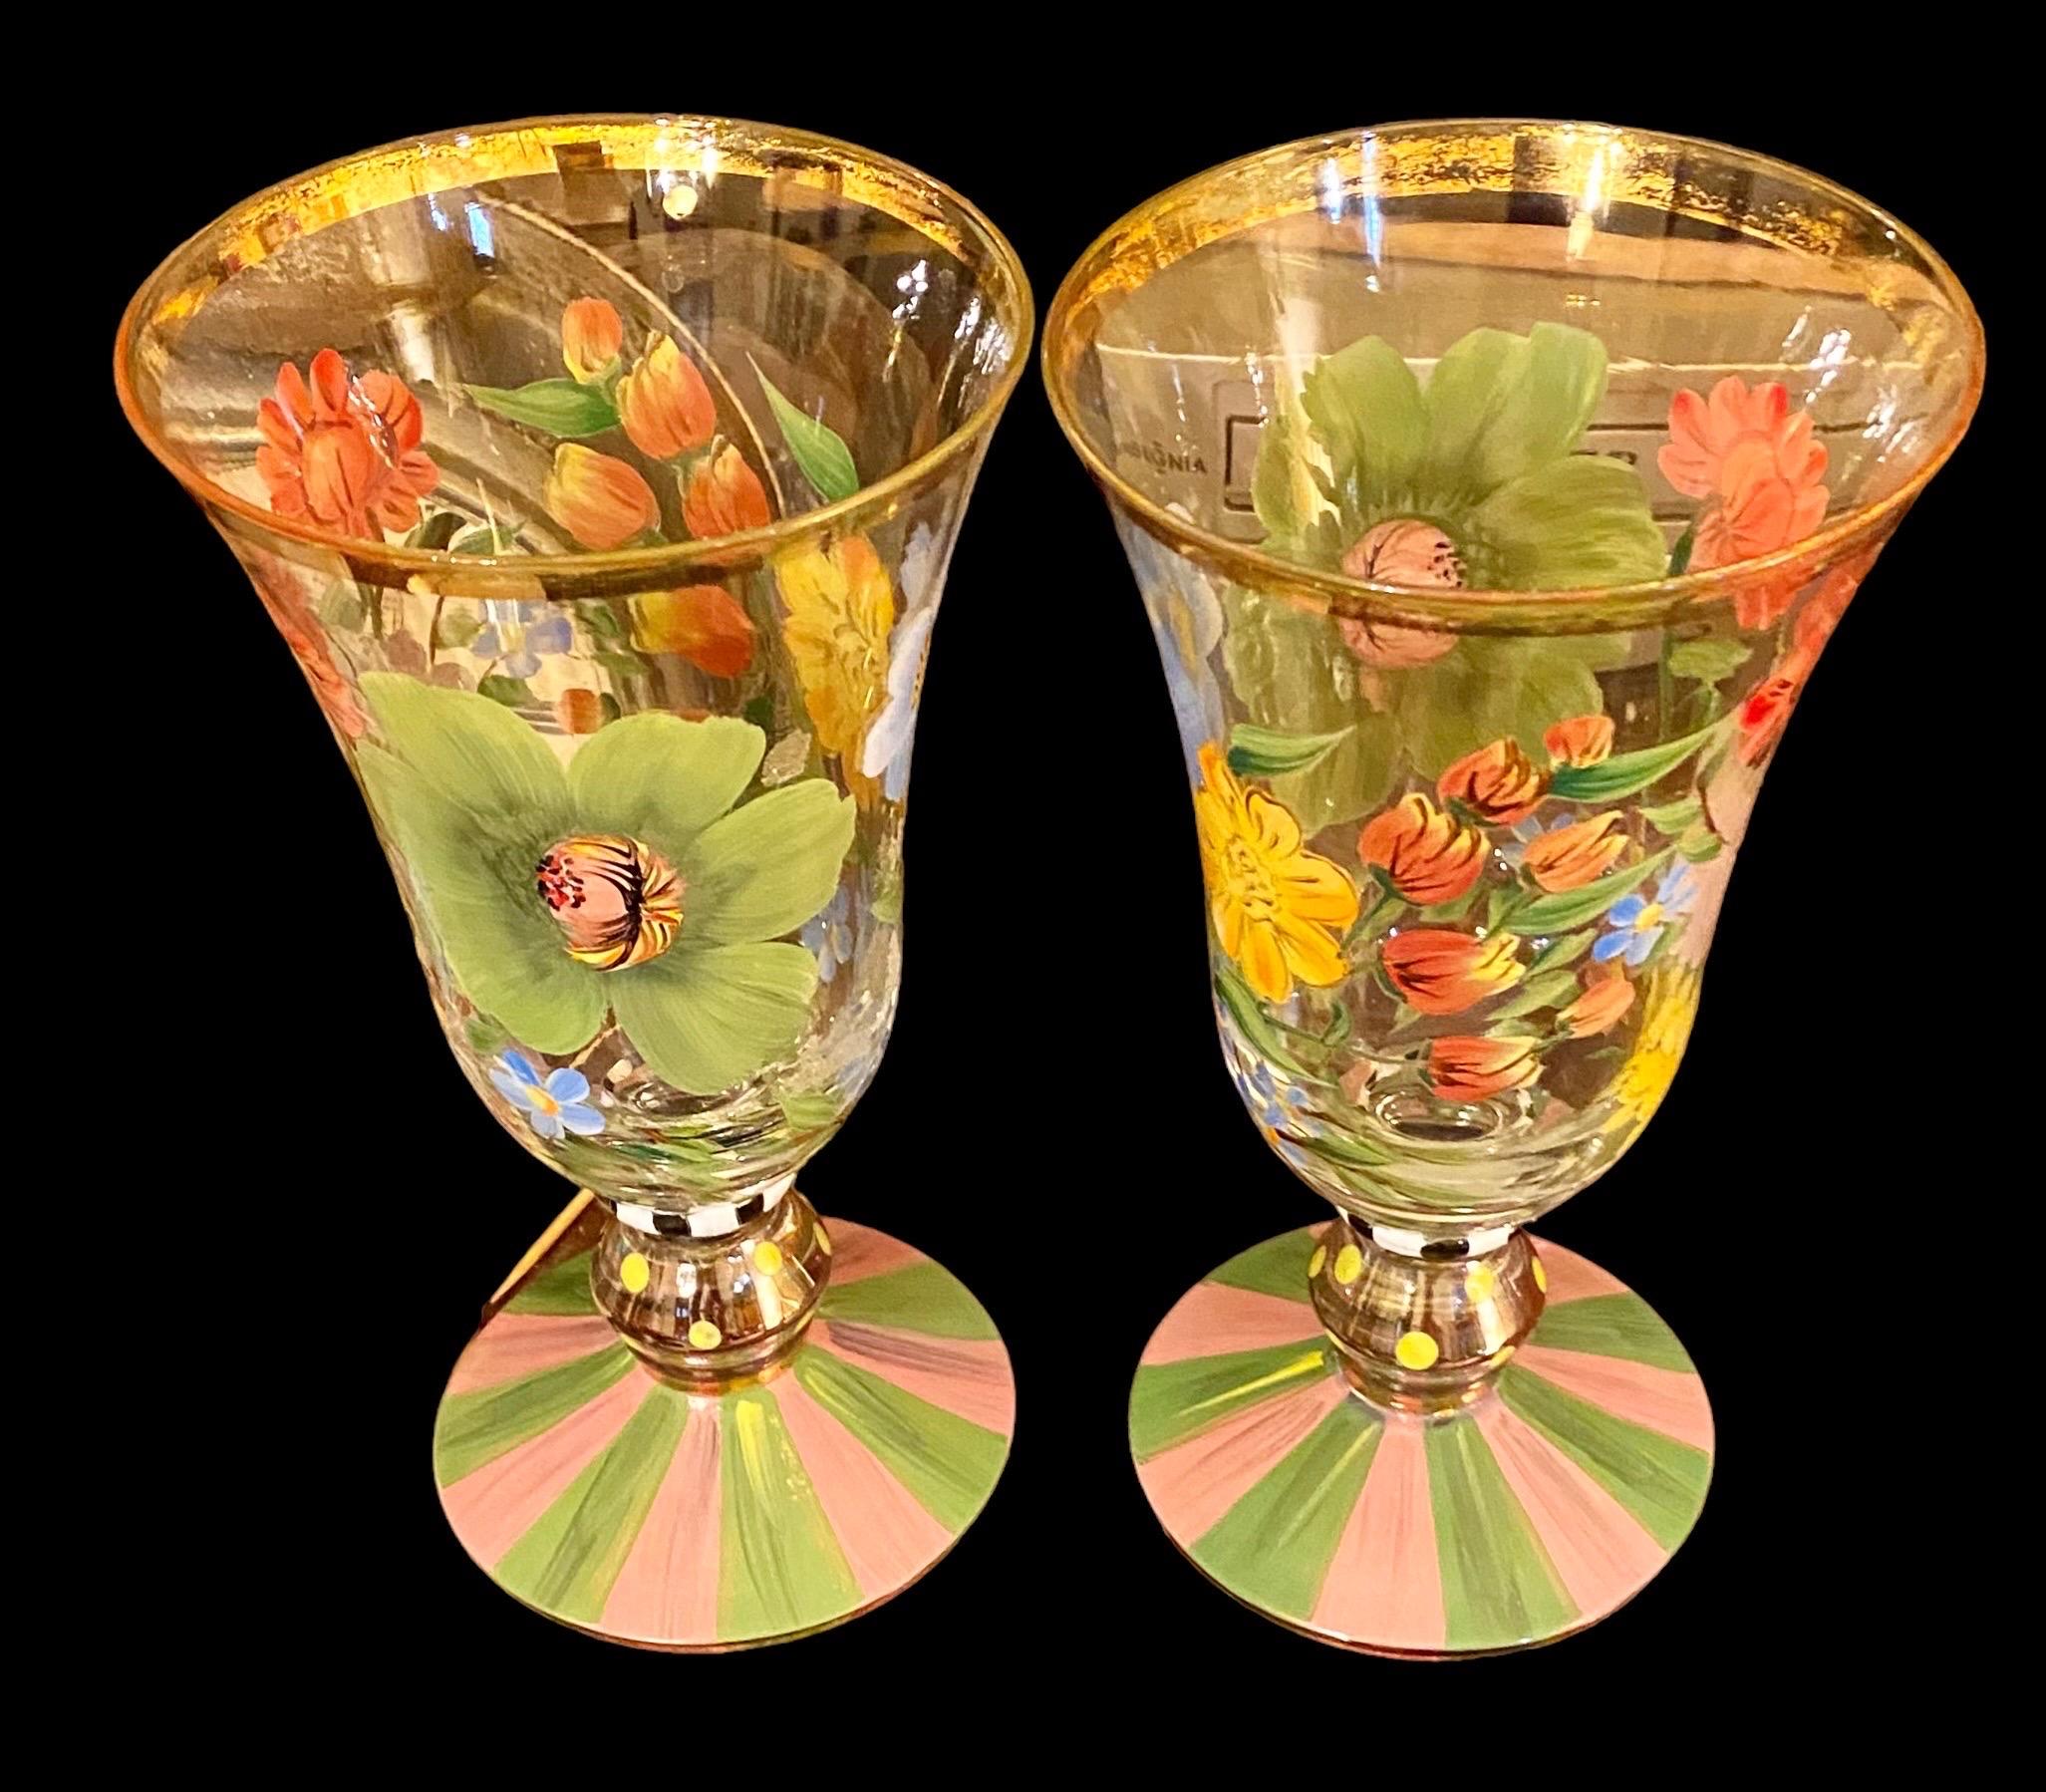 Make any occasion more special by setting the table with this pair of Mackenzie-Child's flower garden goblets. These glasses are perfect for serving chilled water, wine or summer drinks. A stunning spectrum of Courtly Stripes sets the foundation,